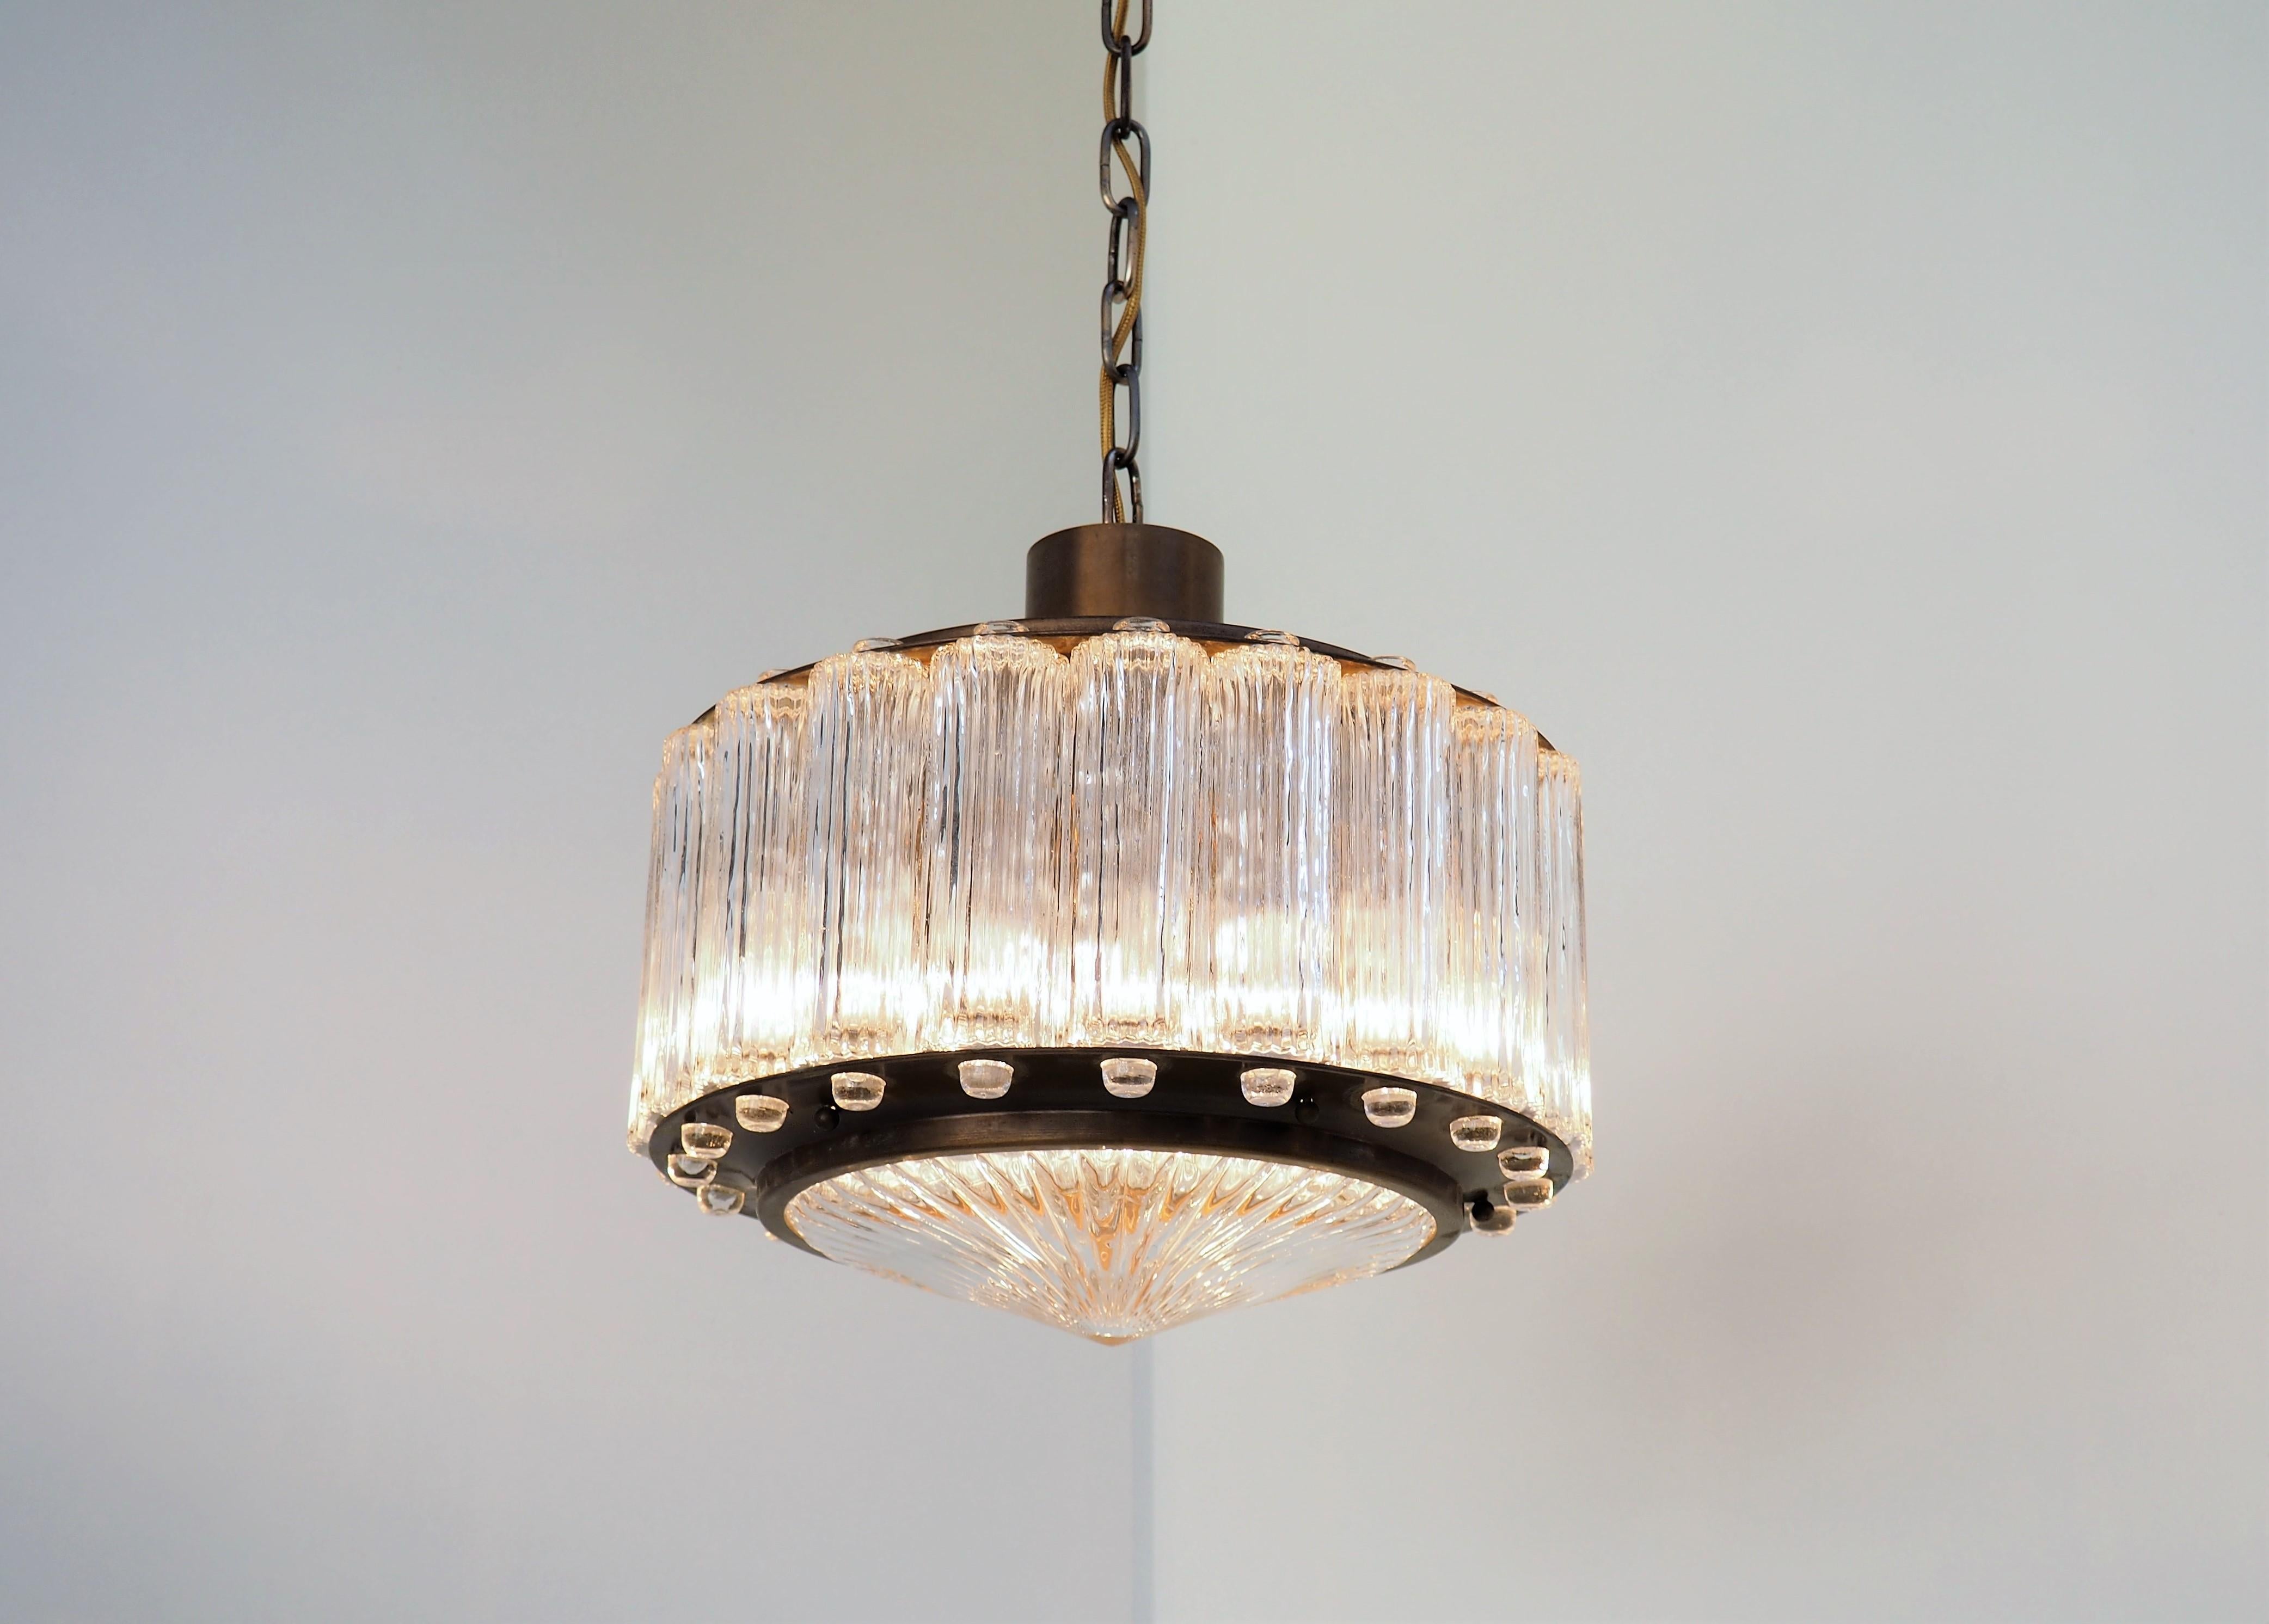 Exclusive and stunning cylindrical chandelier called “Nordlys” which means Northern lights. The chandelier is designed by Swedish designer Eric Wärnå for the Danish company Kemp & Lauritzen, and was only manufactured for a short period in the mid